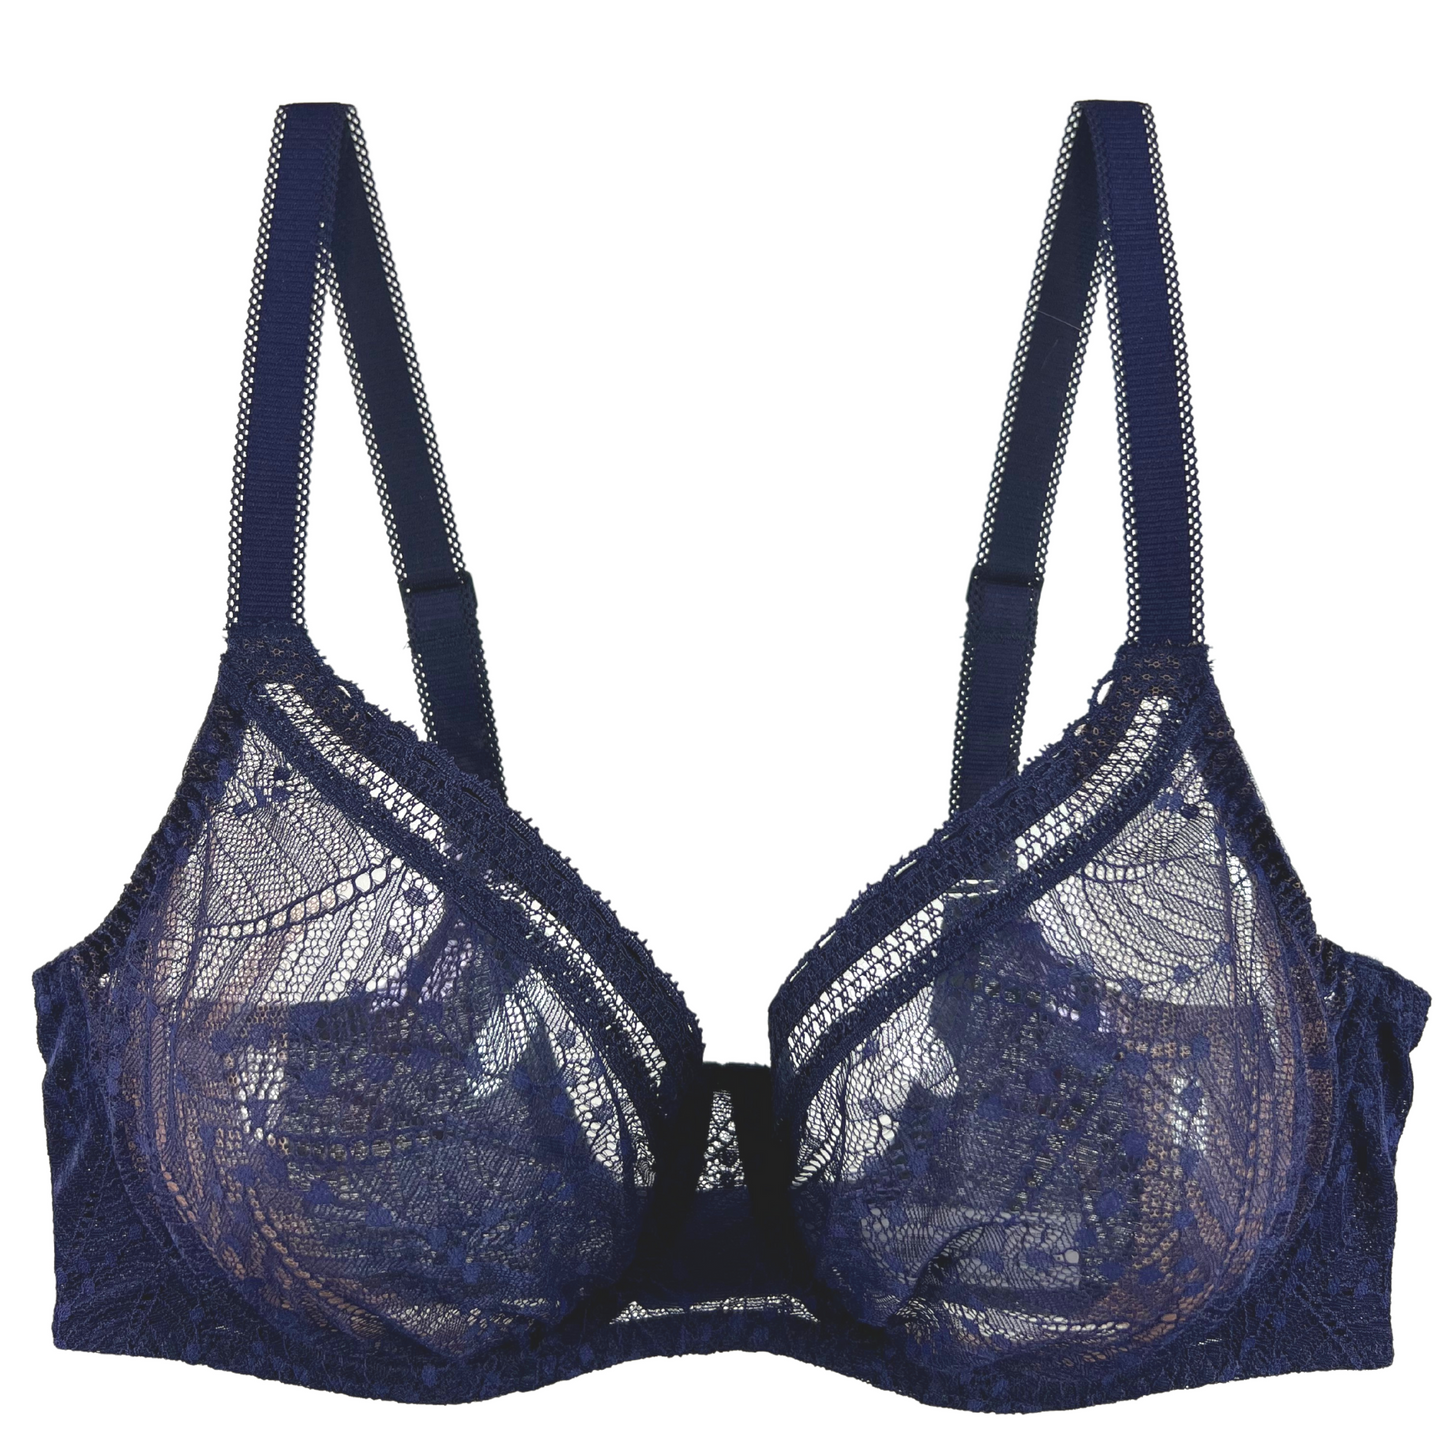 Busti Bras - Bra Boutique - Full coverage Bras is our speciality